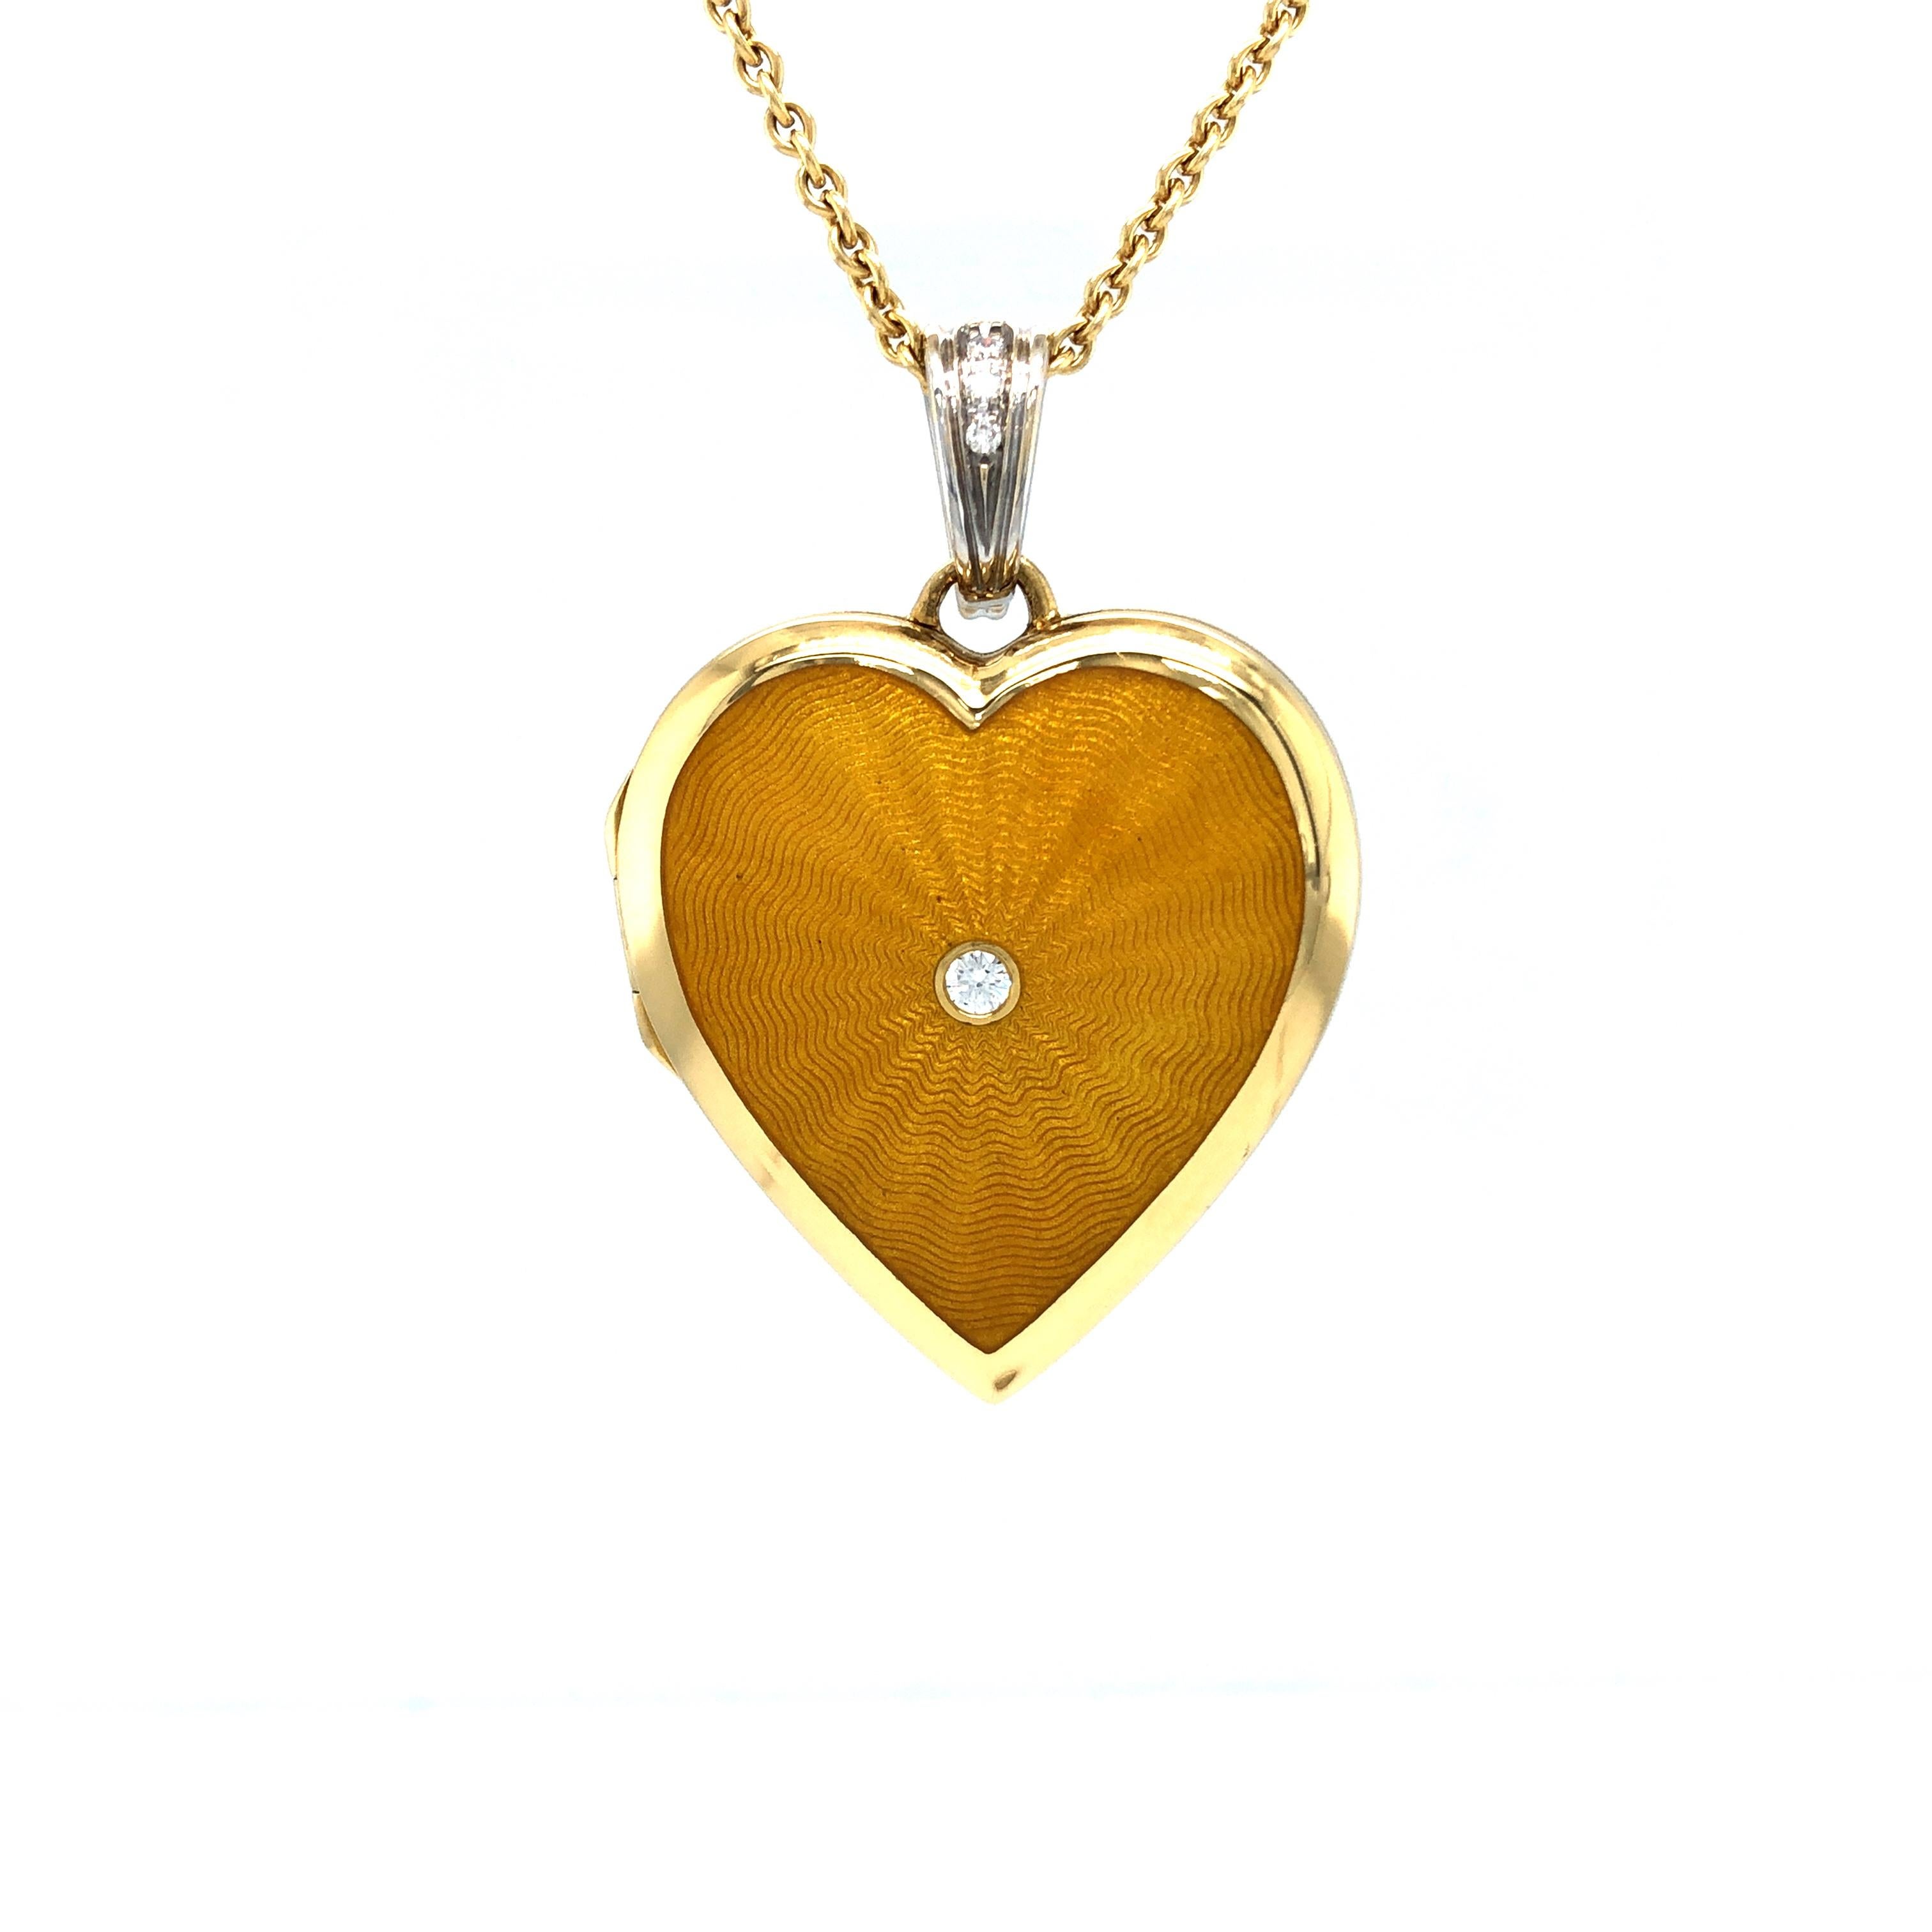 Victor Mayer heart shaped locket pendant necklace 18k yellow gold and white gold, Hallmark collection, yellow vitreous enamel, 4 diamonds 0.8 ct, H VS, brilliant cut

About the creator Victor Mayer
Victor Mayer is internationally renowned for